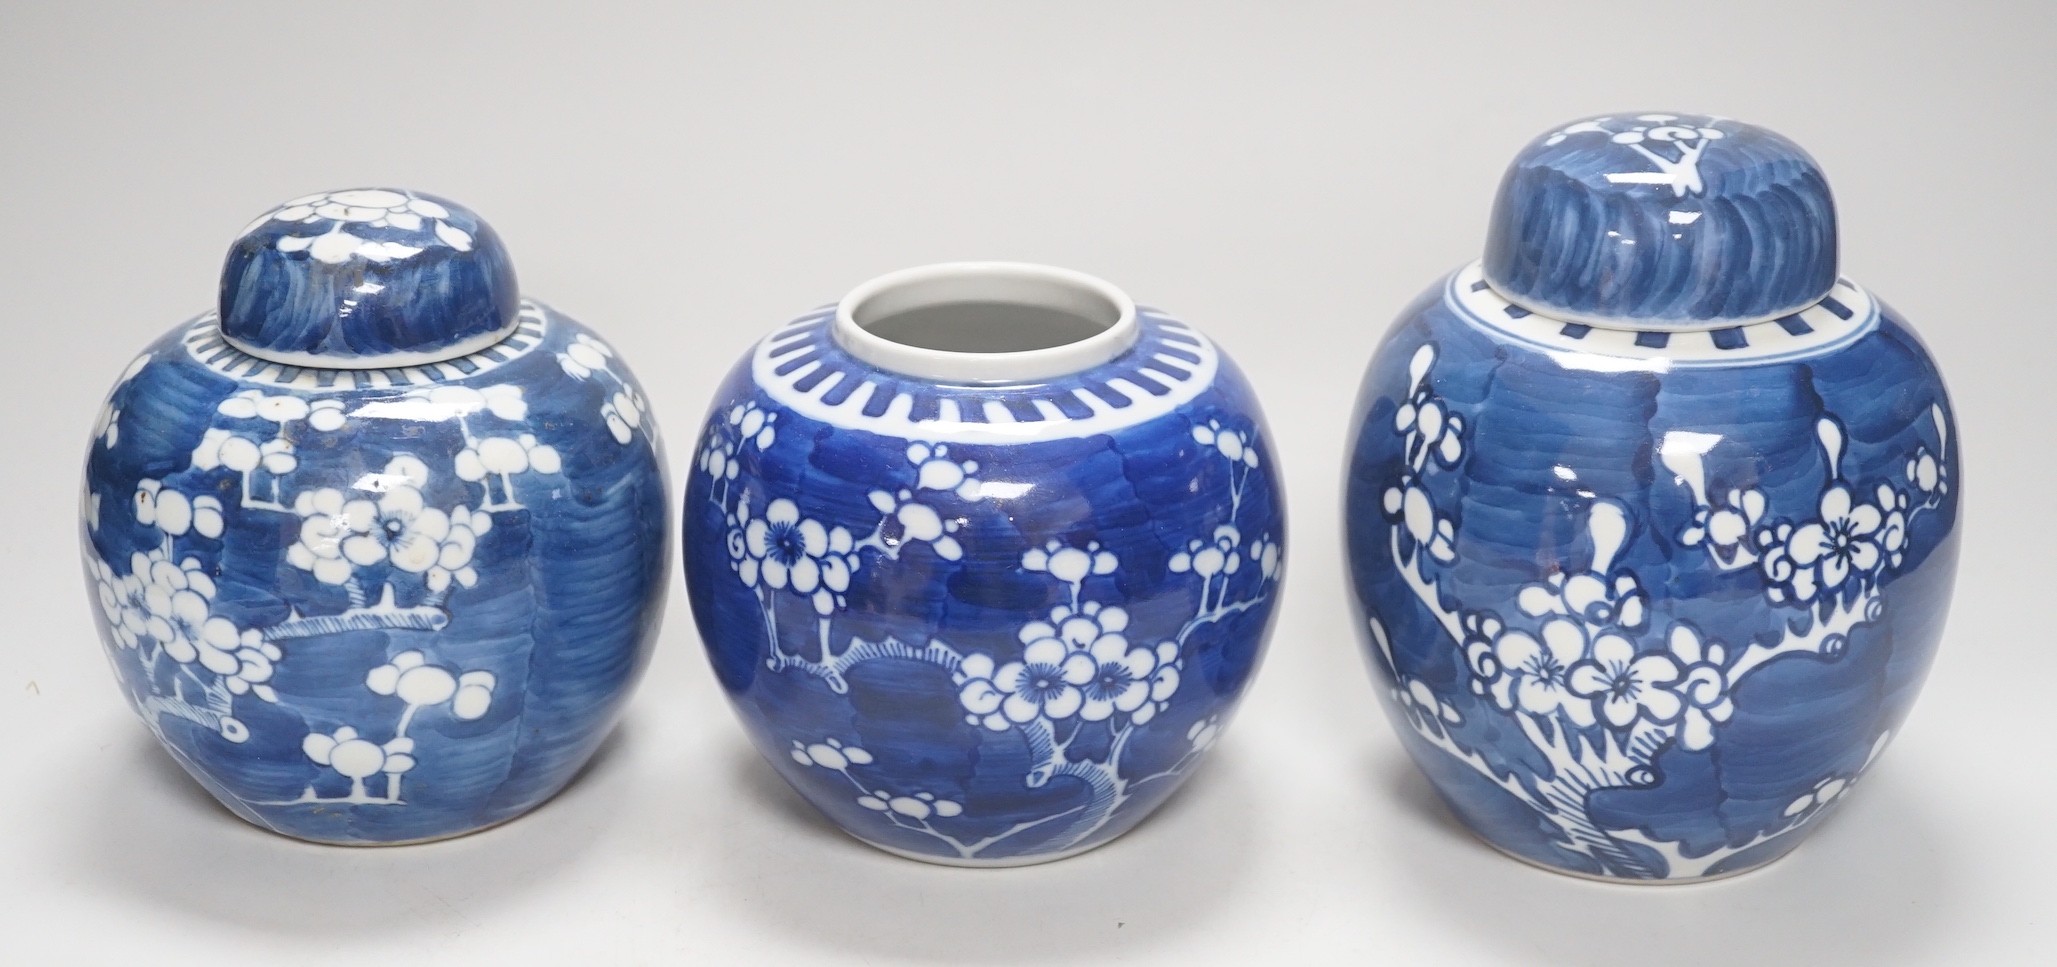 Three Chinese blue and white prunus jars, late 19th / early 20th century, tallest 16cm